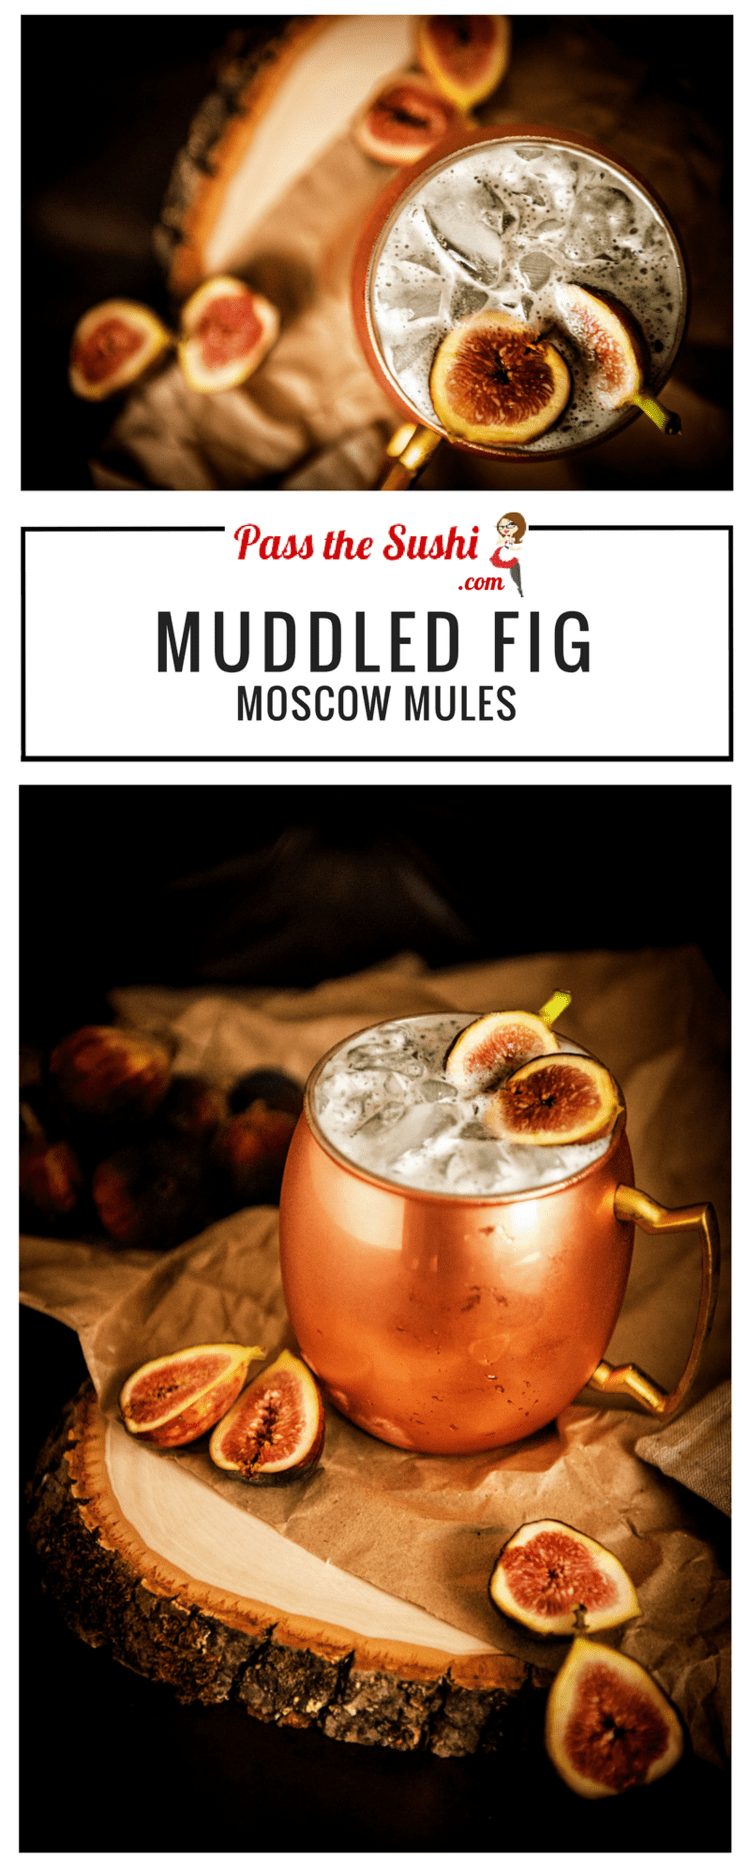 Muddled Fig Moscow Mule | I am OBSESSED with figs! And not wanting any of the bounty to go to waste, I added a few of the bad boys to my happy hour libation to create a fun seasonal Moscow Mule